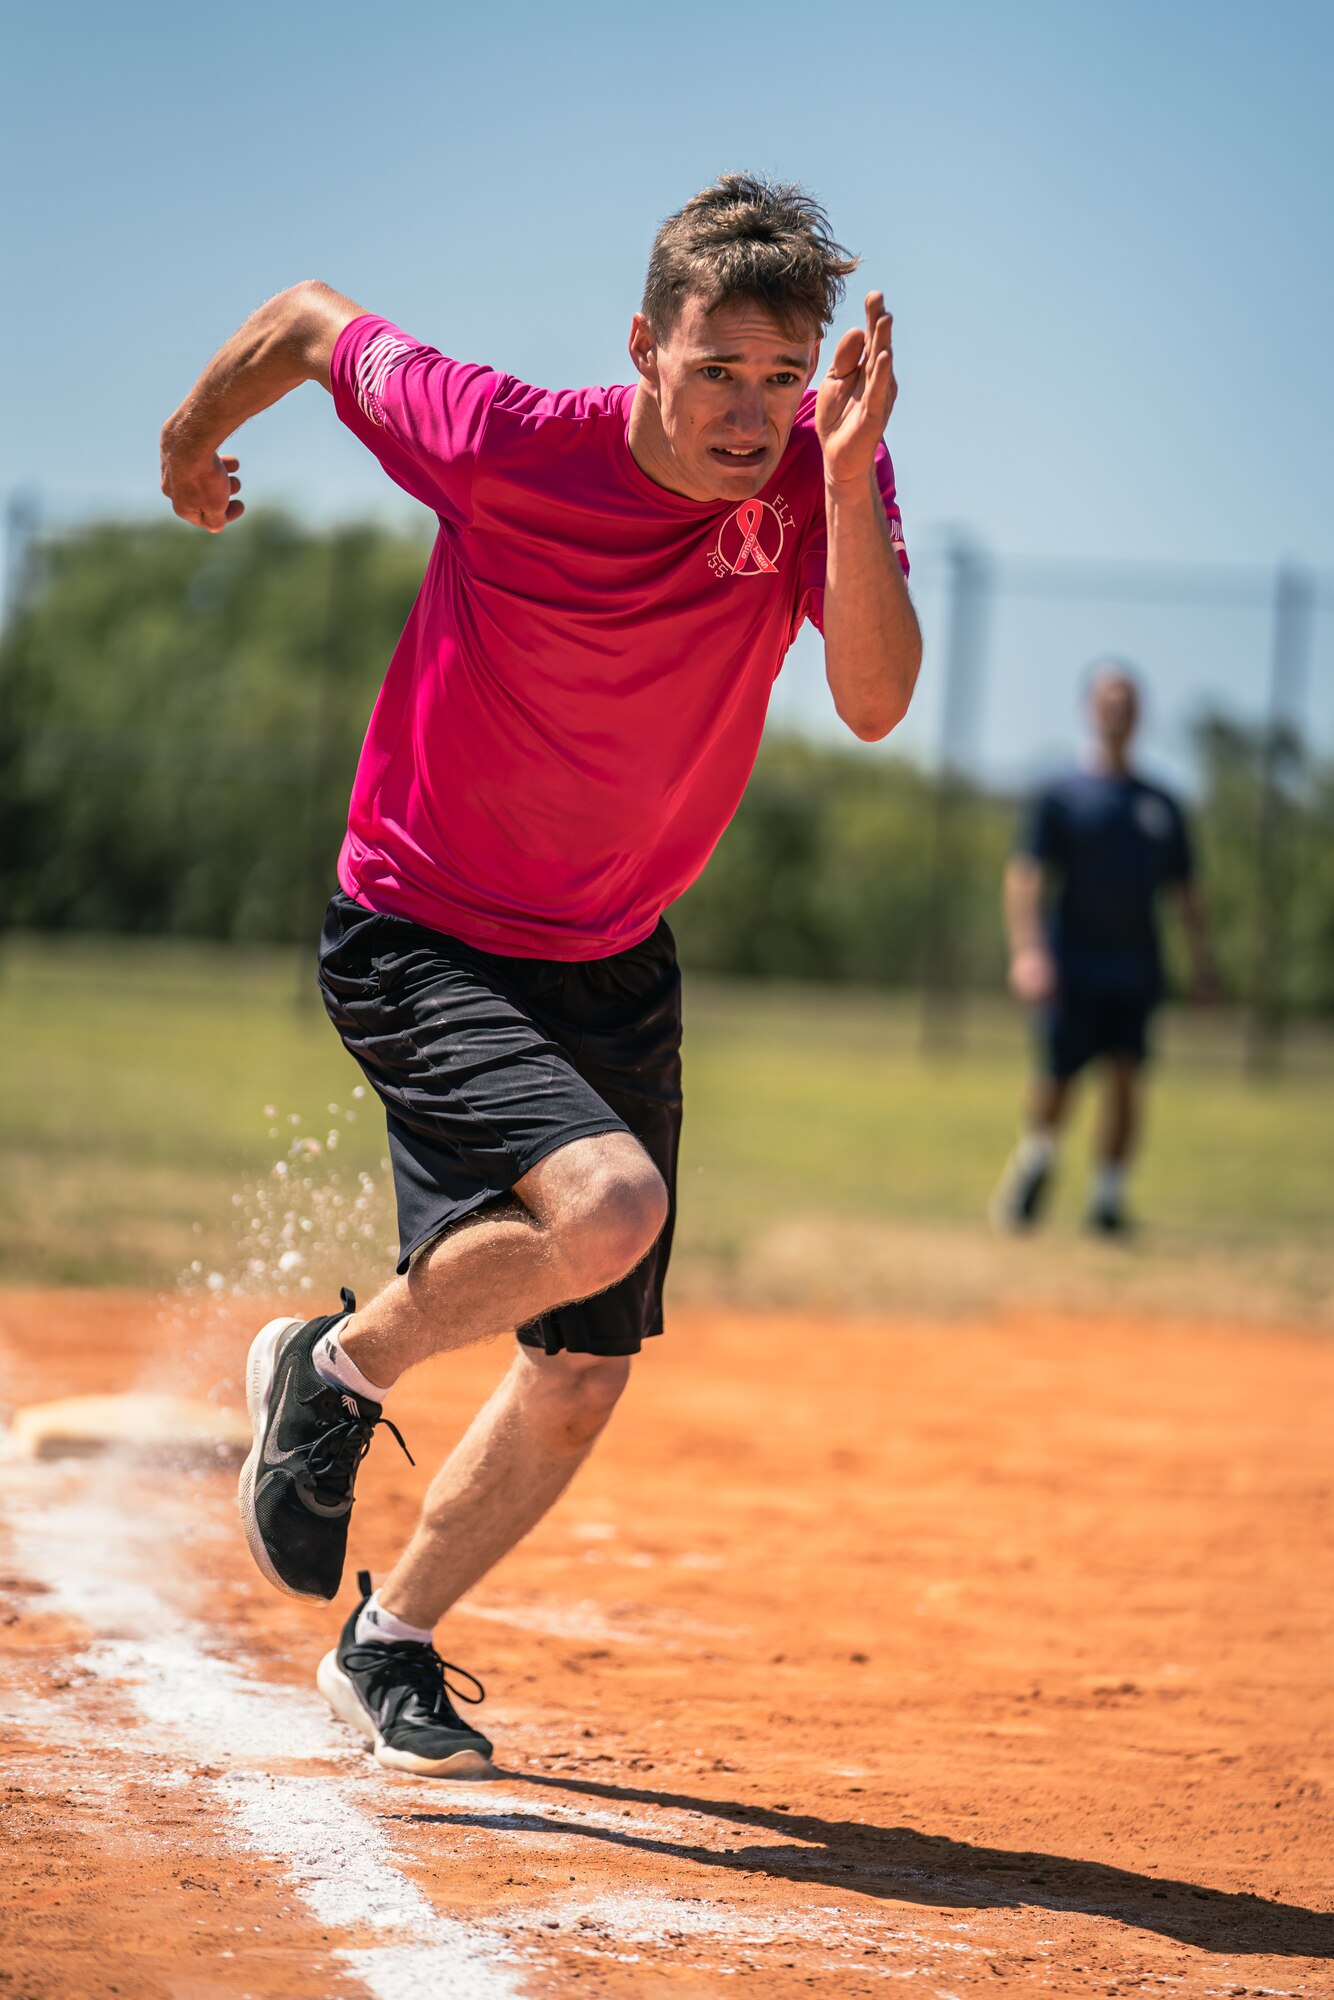 A U.S. Airman assigned to the 6th Air Refueling Wing participates in a kickball game during wingman day at MacDill Air Force Base, Florida, April 22, 2022.